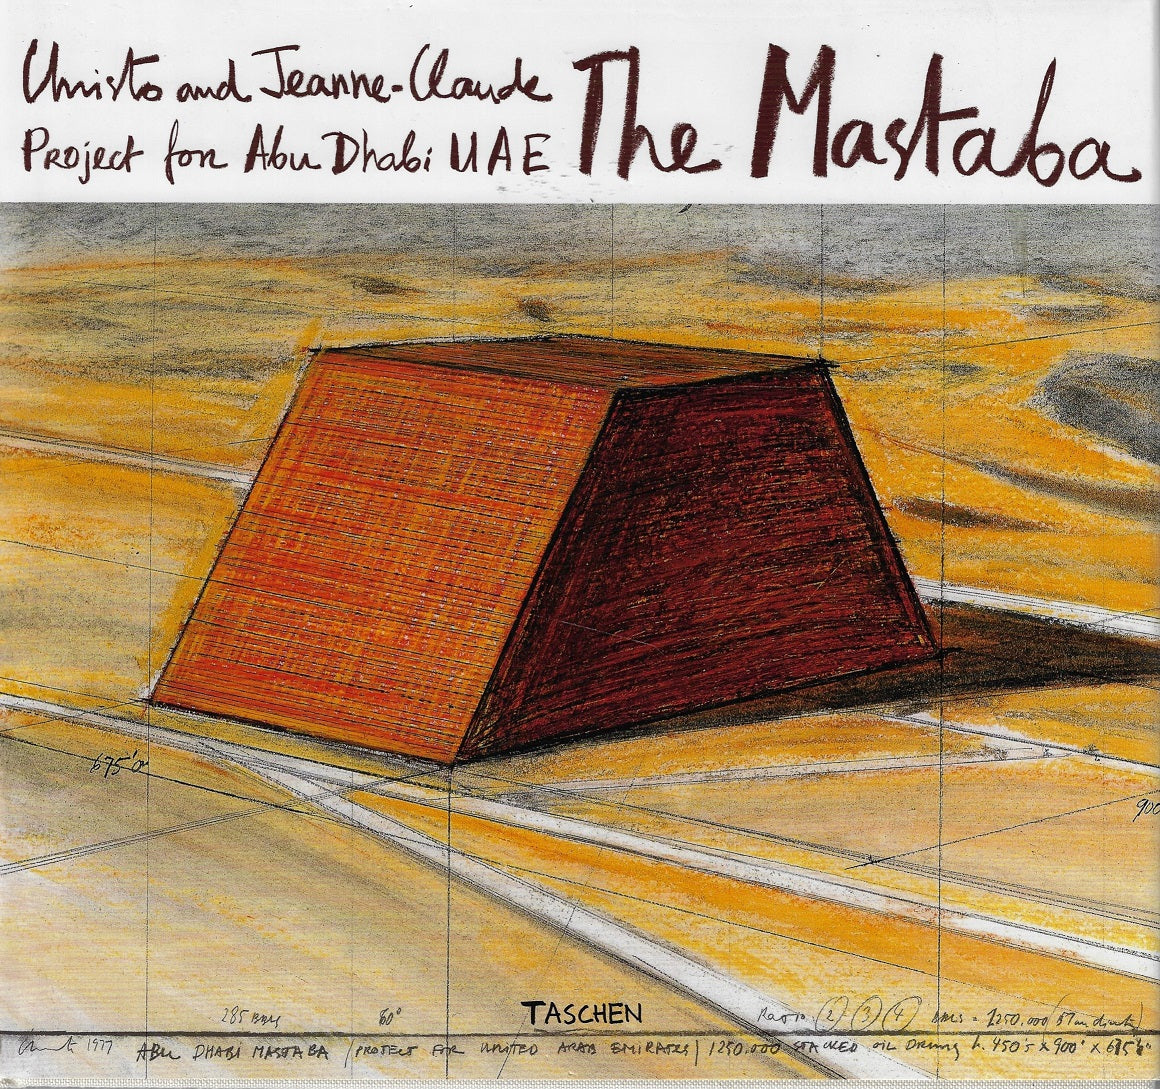 The Mastaba, Project for Abu Dhabi